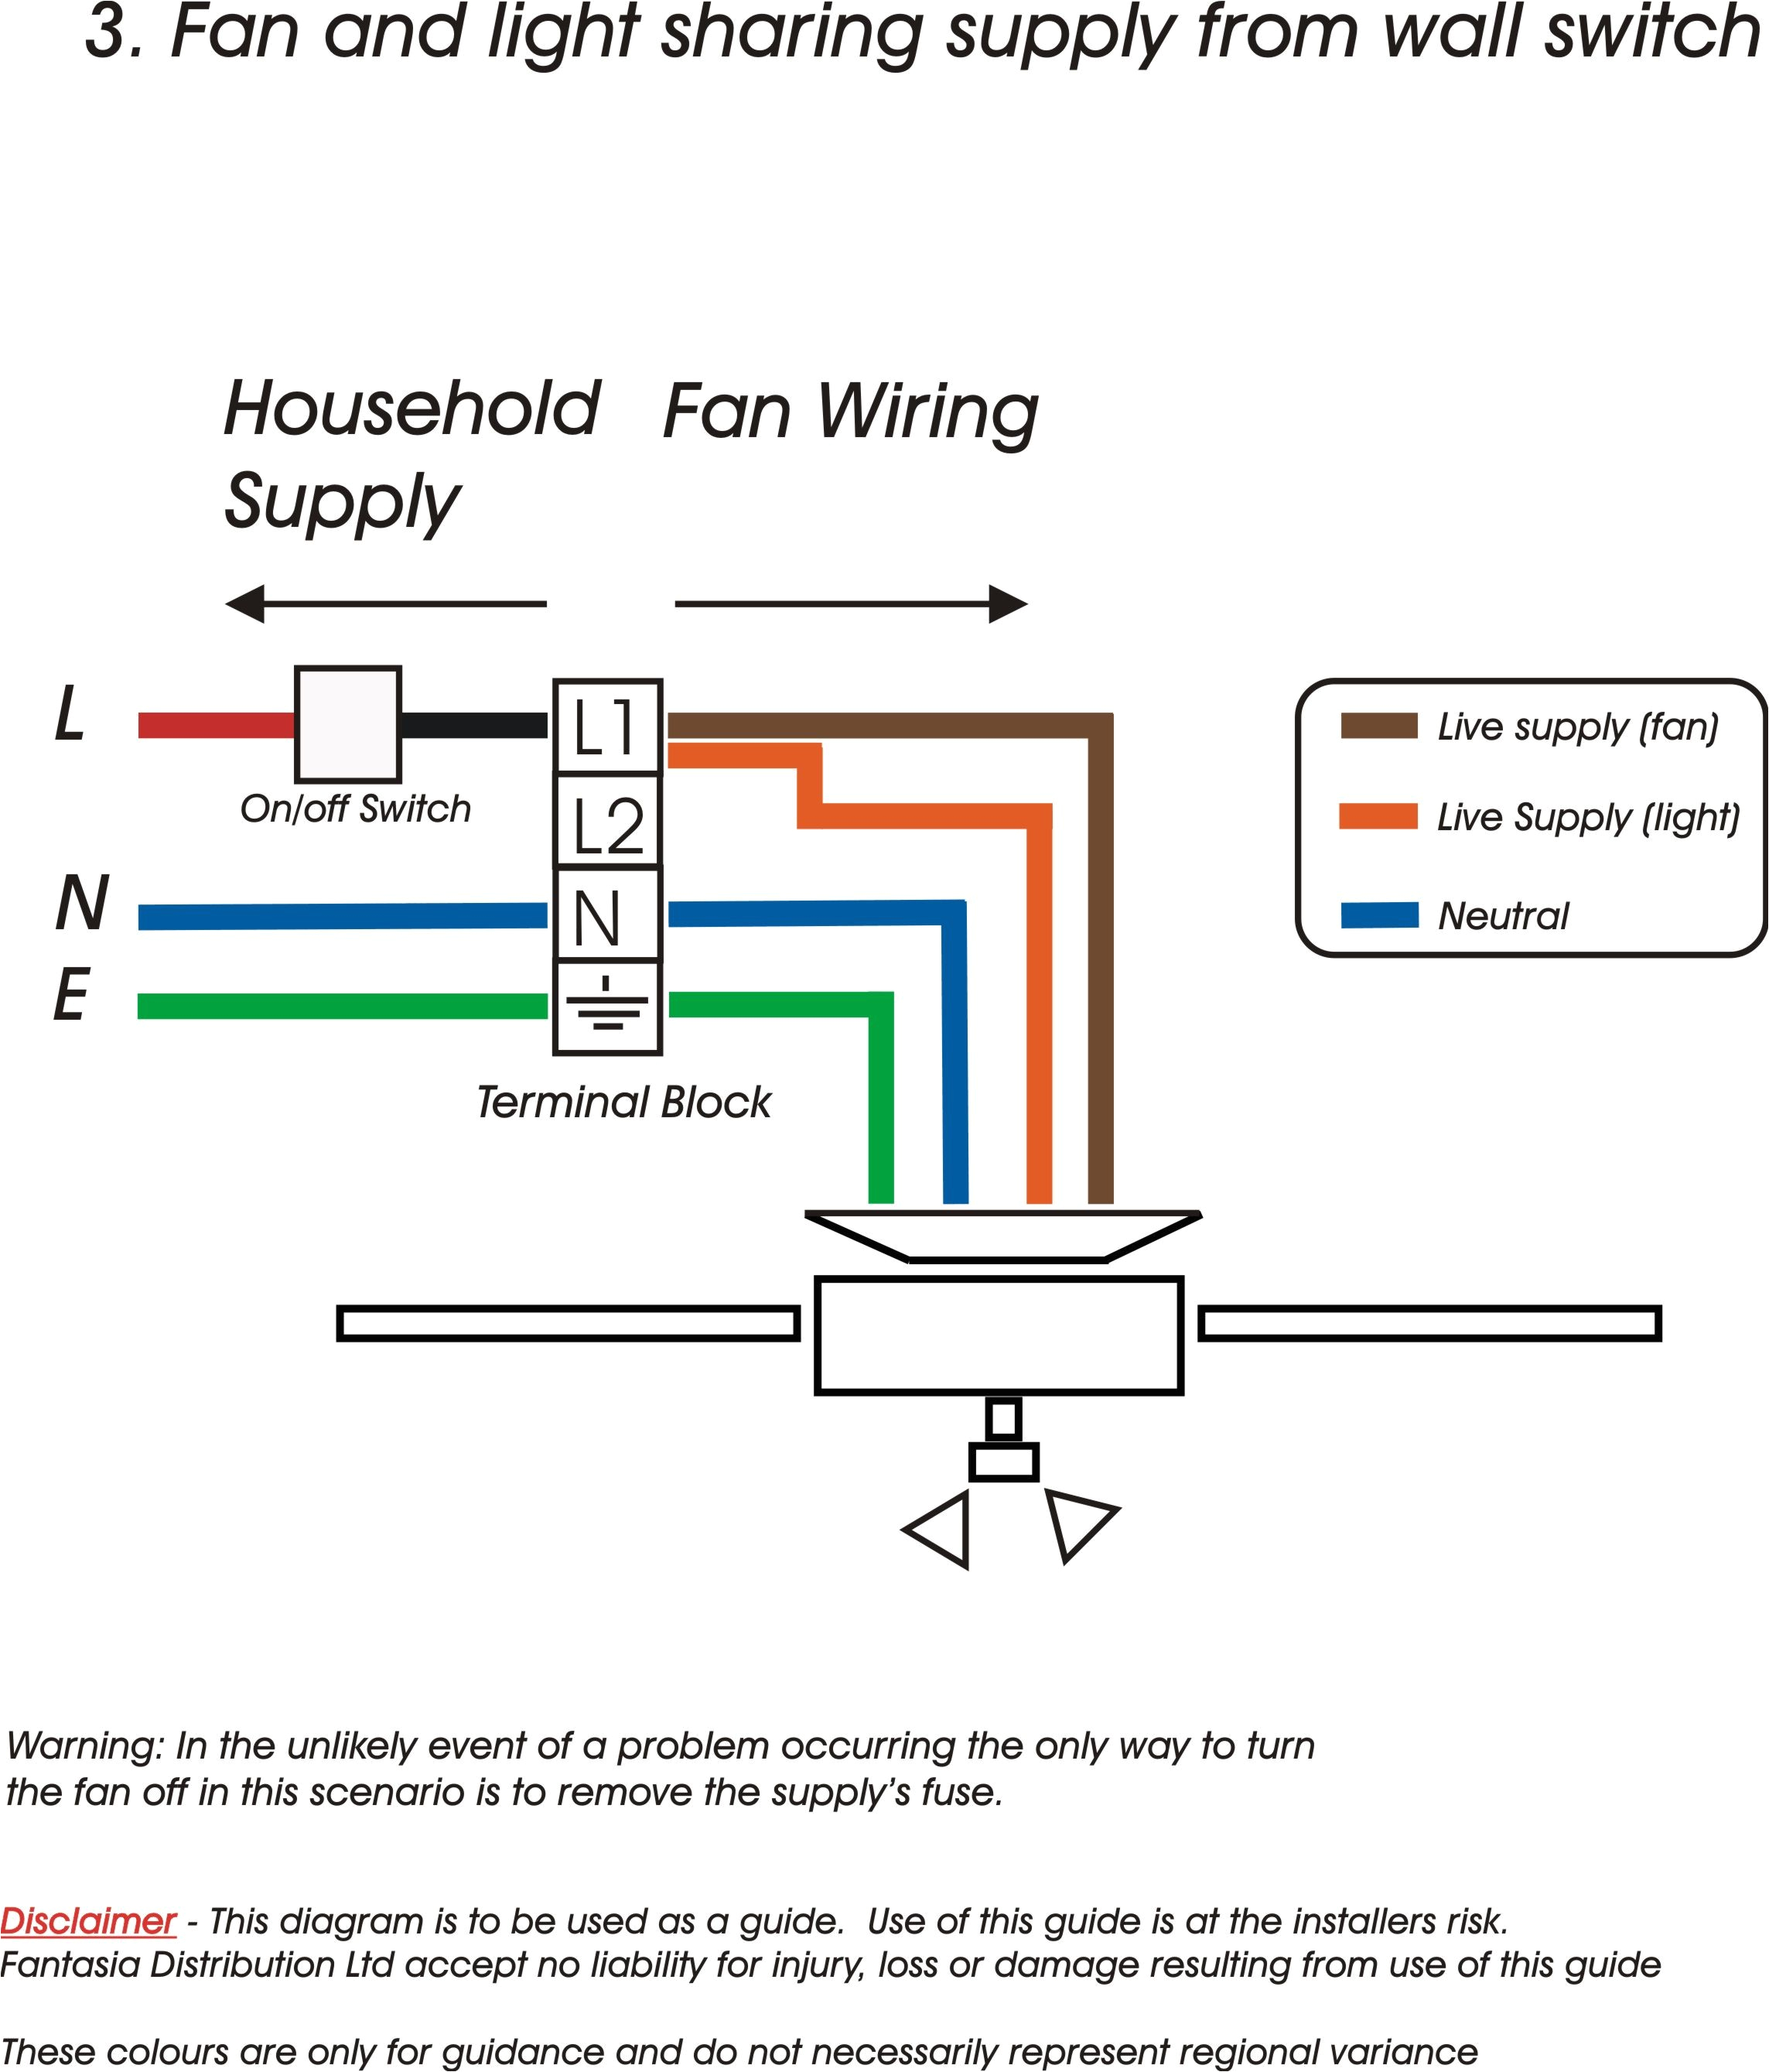 wiring diagram for hunter ceiling fan with light new hunter ceiling fan wall switch wiring schema diagram database of wiring diagram for hunter ceiling fan with light jpg